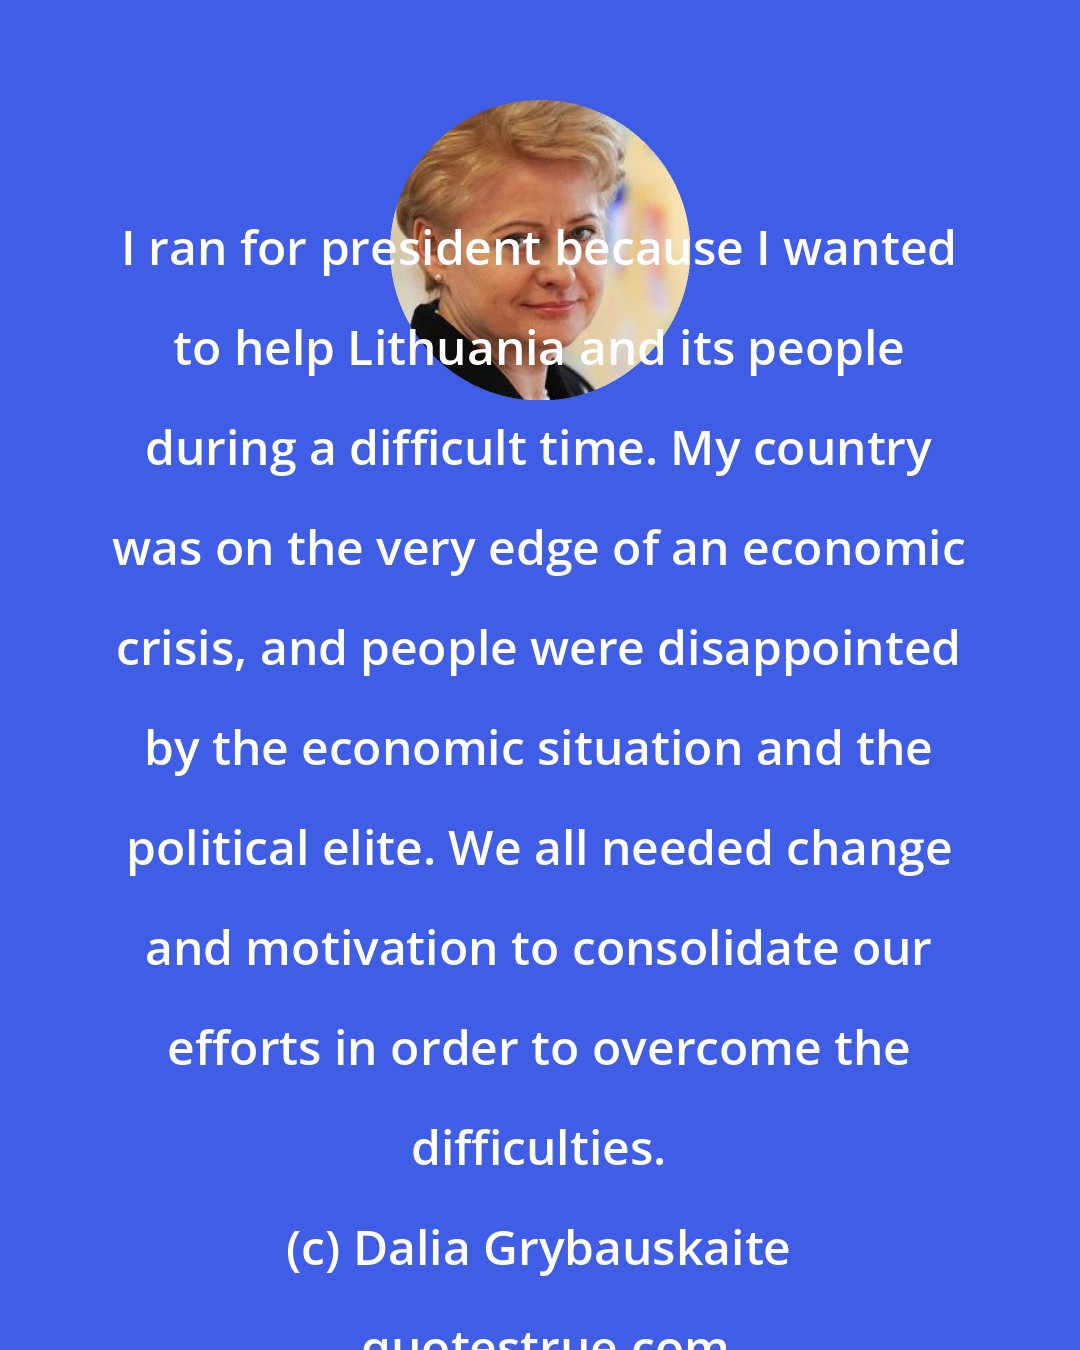 Dalia Grybauskaite: I ran for president because I wanted to help Lithuania and its people during a difficult time. My country was on the very edge of an economic crisis, and people were disappointed by the economic situation and the political elite. We all needed change and motivation to consolidate our efforts in order to overcome the difficulties.